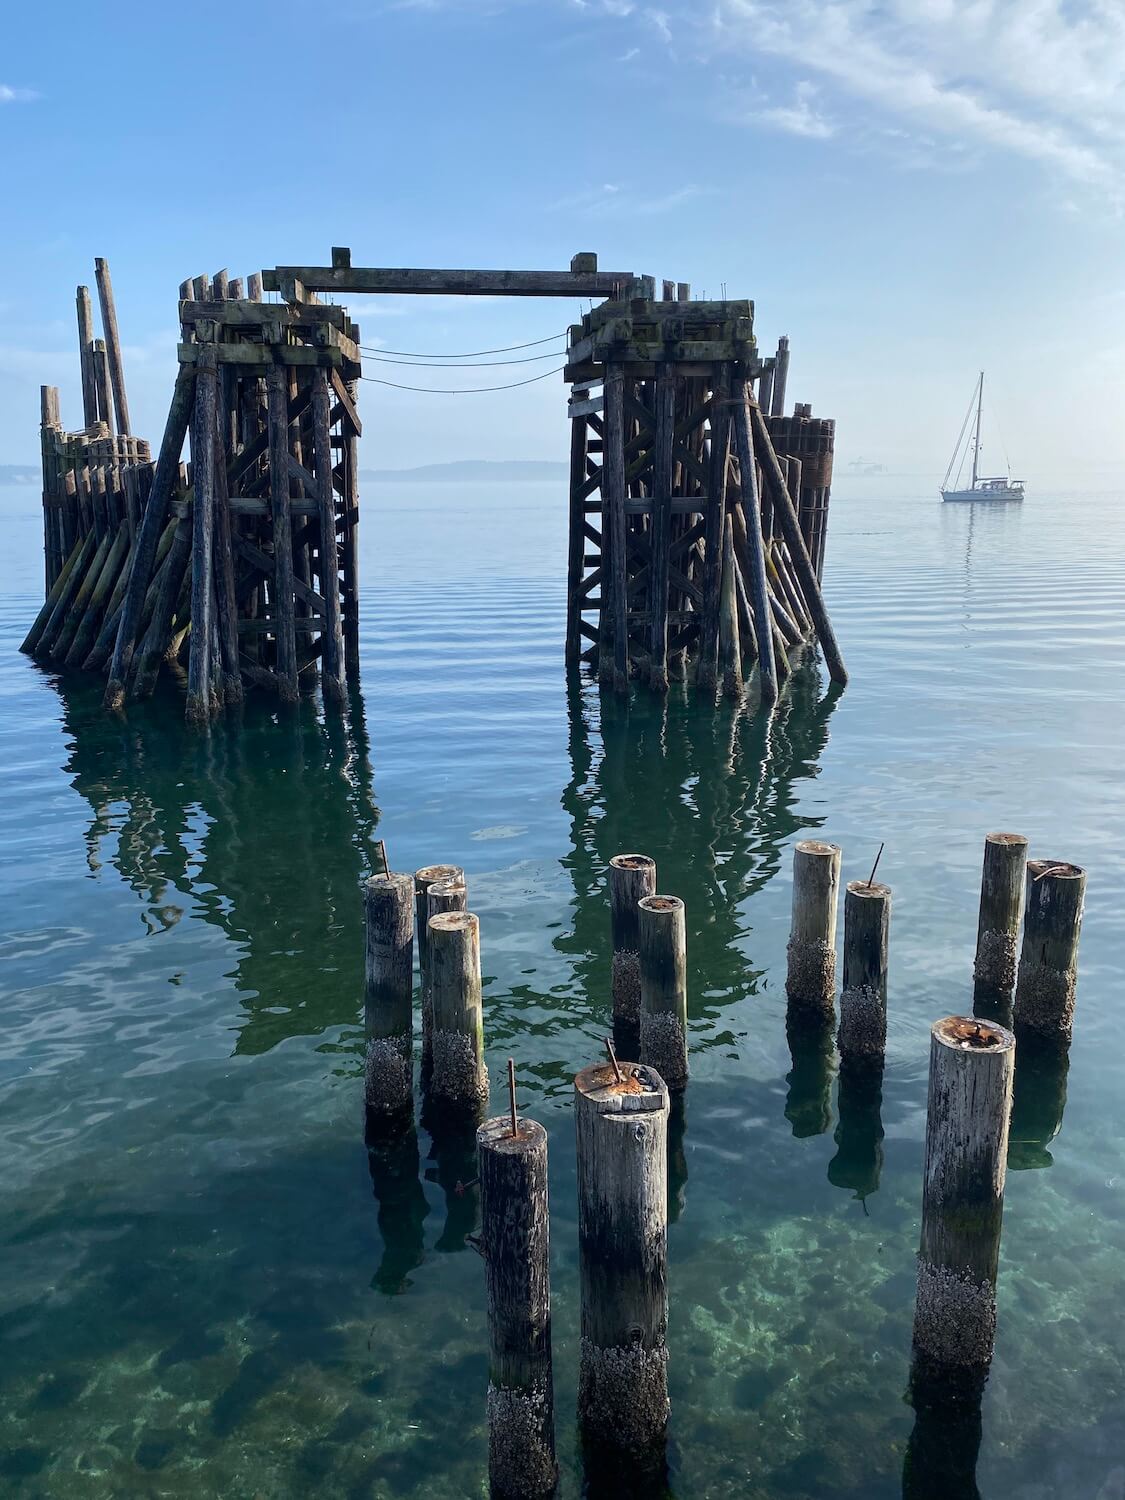 A ferry dock landing sits empty while several old log pilings pop up from the clear waters of the Salish Sea.